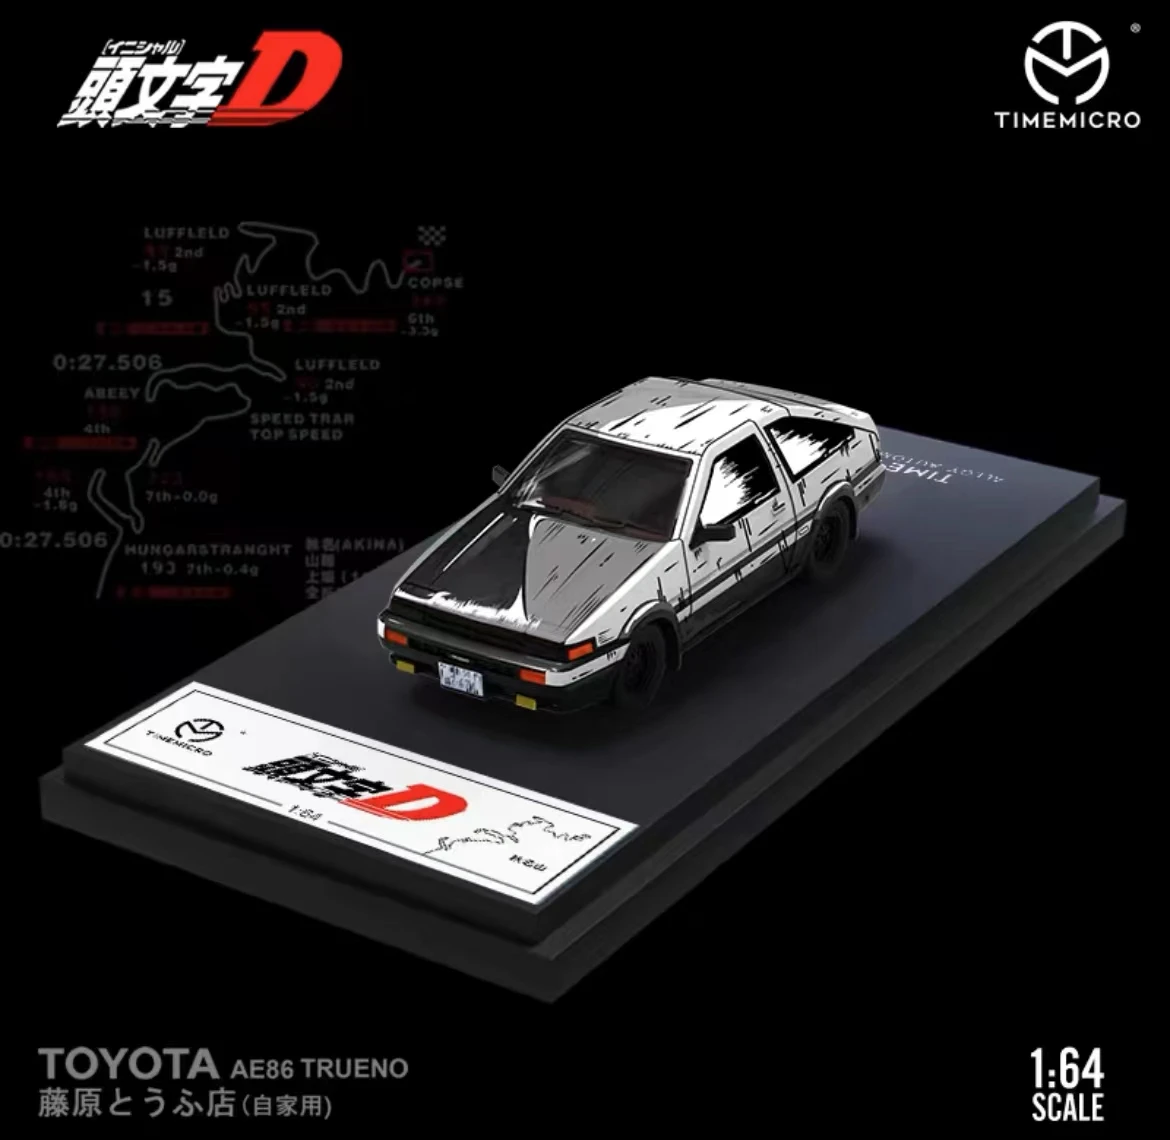 Timemicro 1:64 AE86  First text D comic book version simulation alloy car model